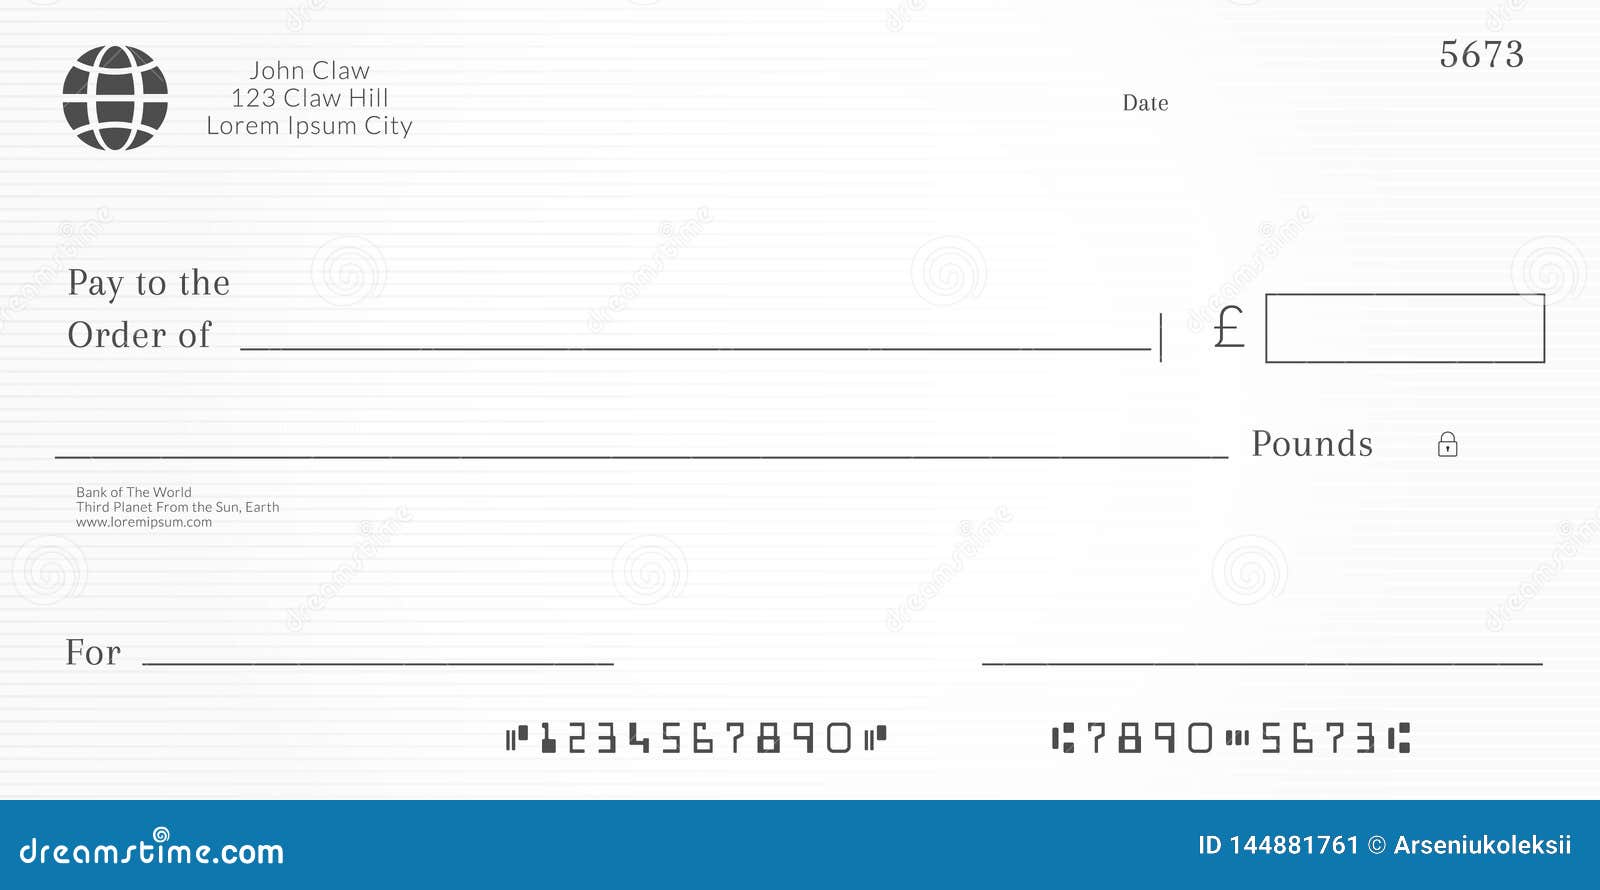 How Did We Get There? The History Of donation receipt template for 501c3 Told Through Tweets